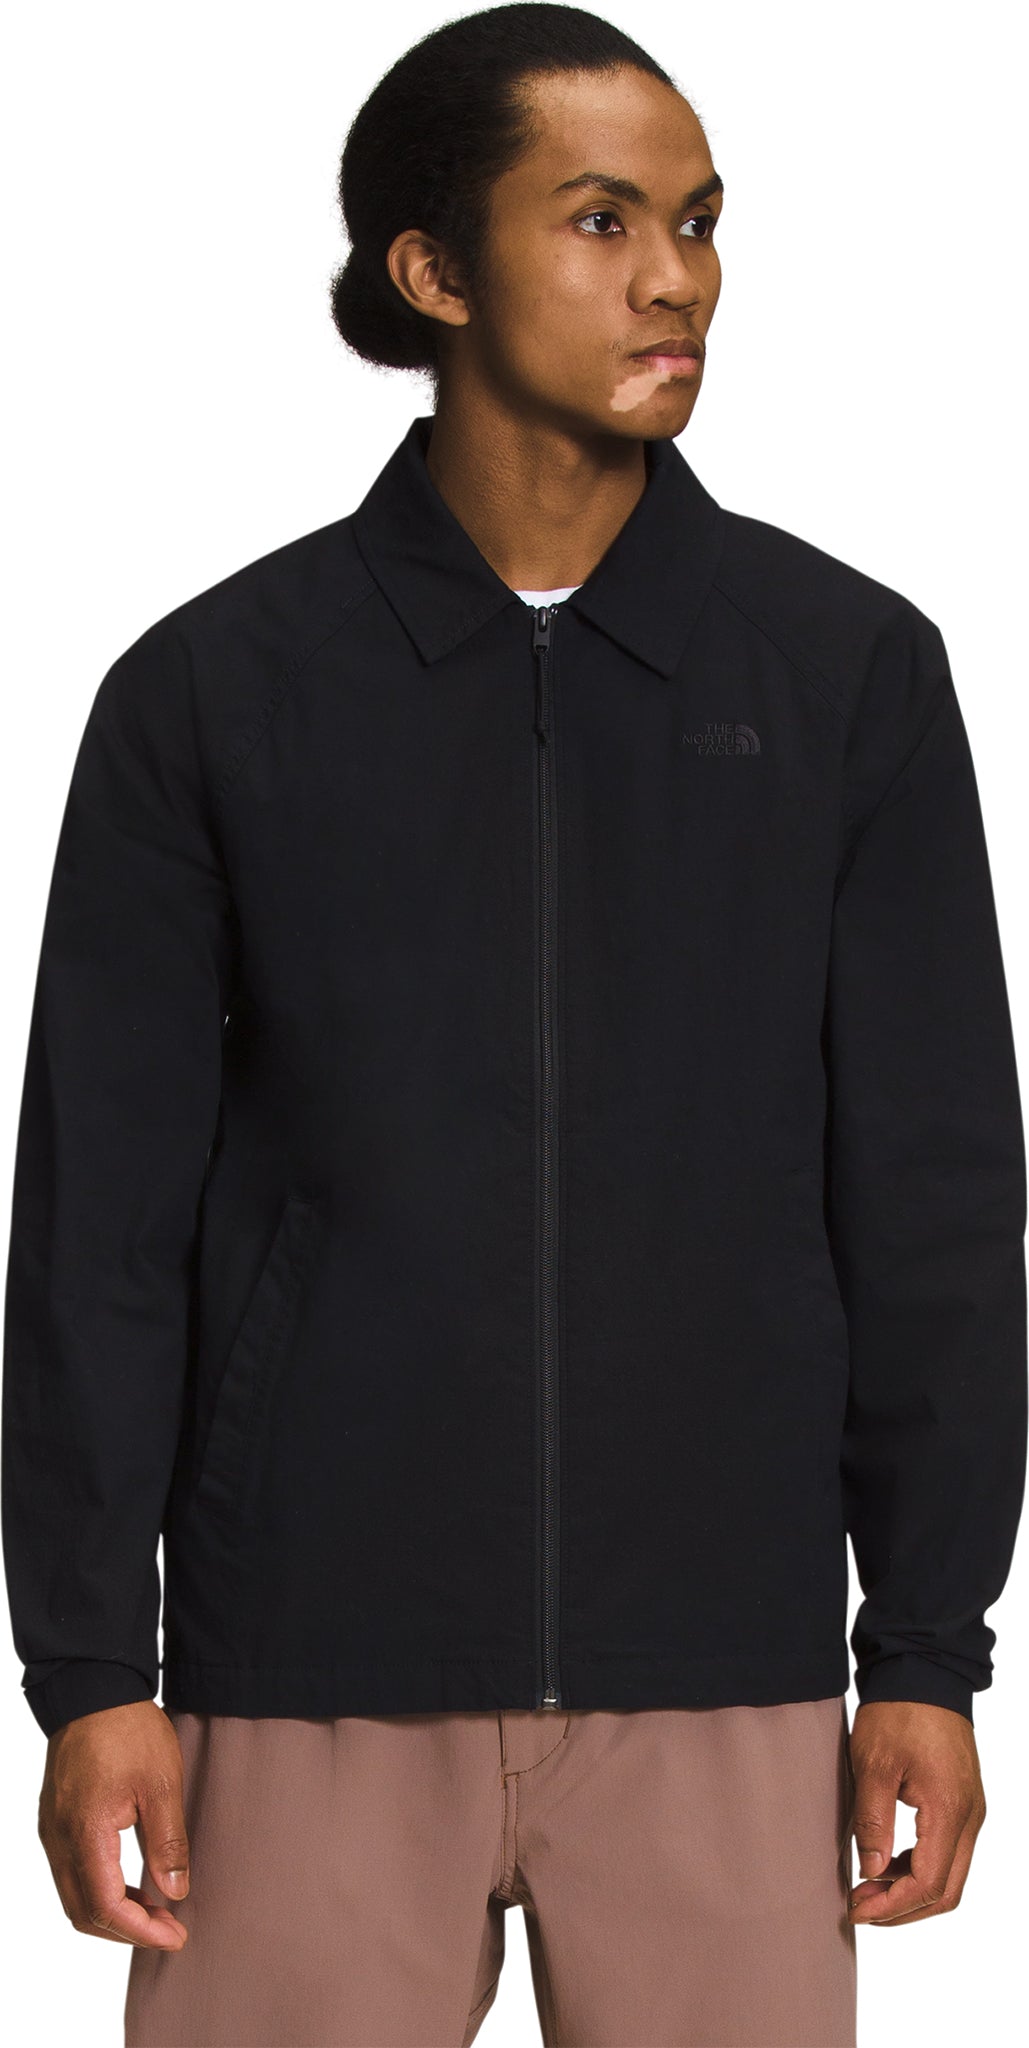 The North Face Ripstop Coaches Jacket - Men’s